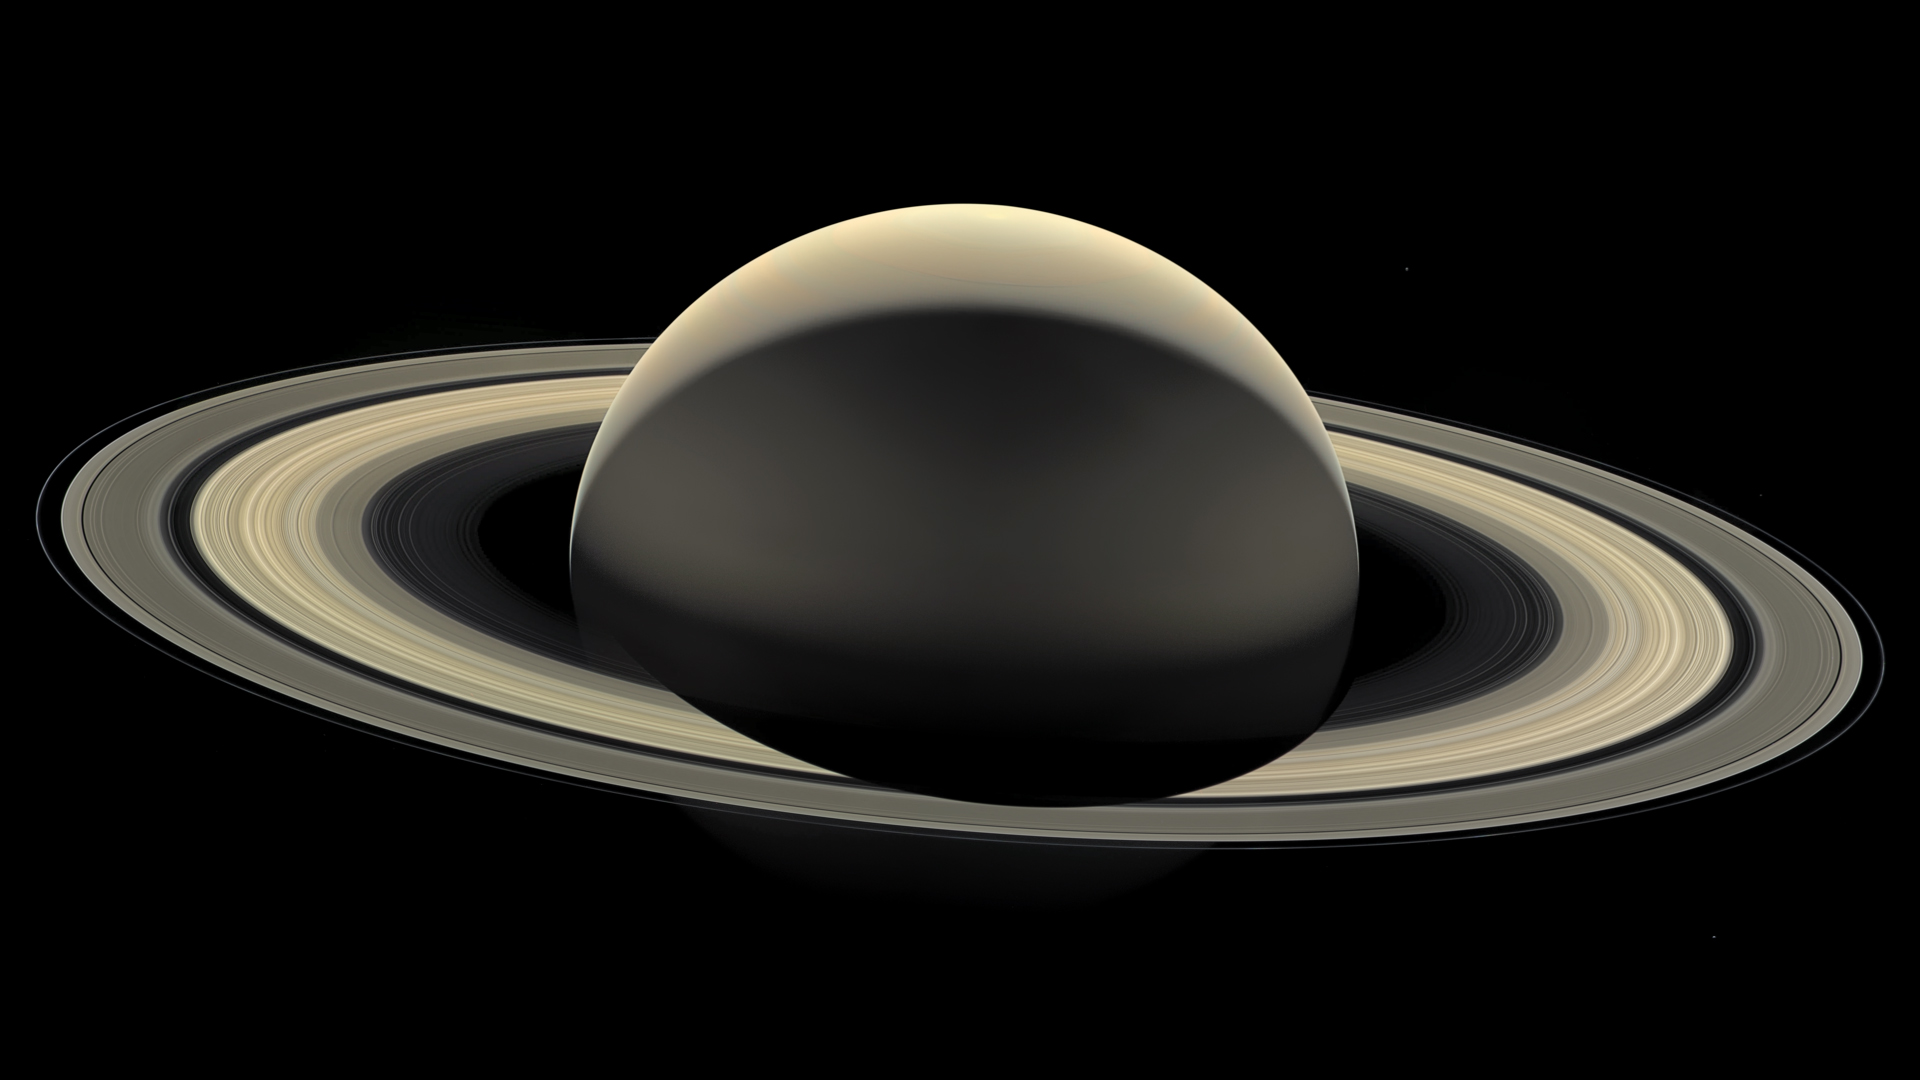 19 Fun & Interesting Saturn Facts - The Ringed Planet - Living Cosmos